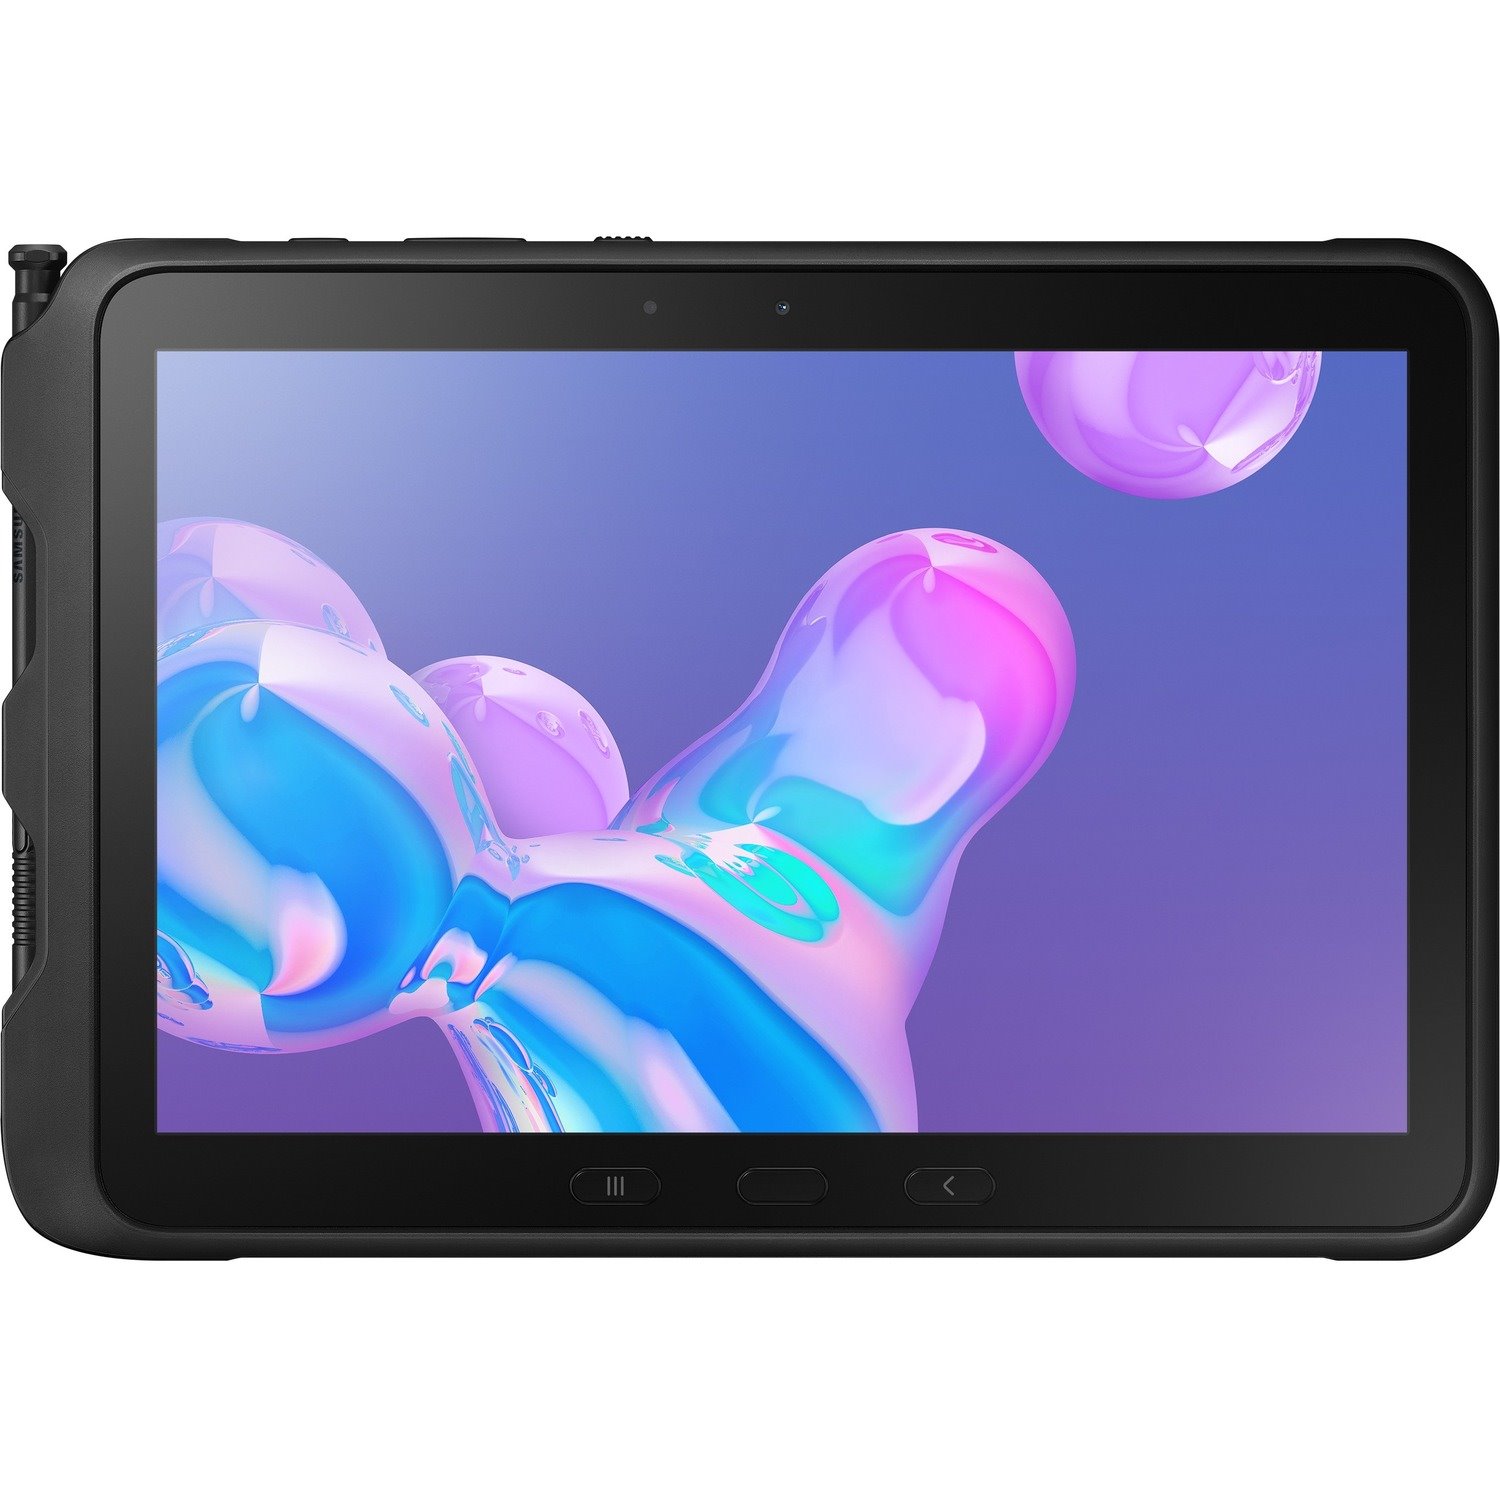 Samsung Galaxy Tab Active Pro SM-T545 Tablet - 25.7 cm (10.1") - Dual-core (2 Core) 2 GHz Hexa-core (6 Core) 1.70 GHz - 4 GB RAM - 64 GB Storage - Android 9.0 Pie - 4G